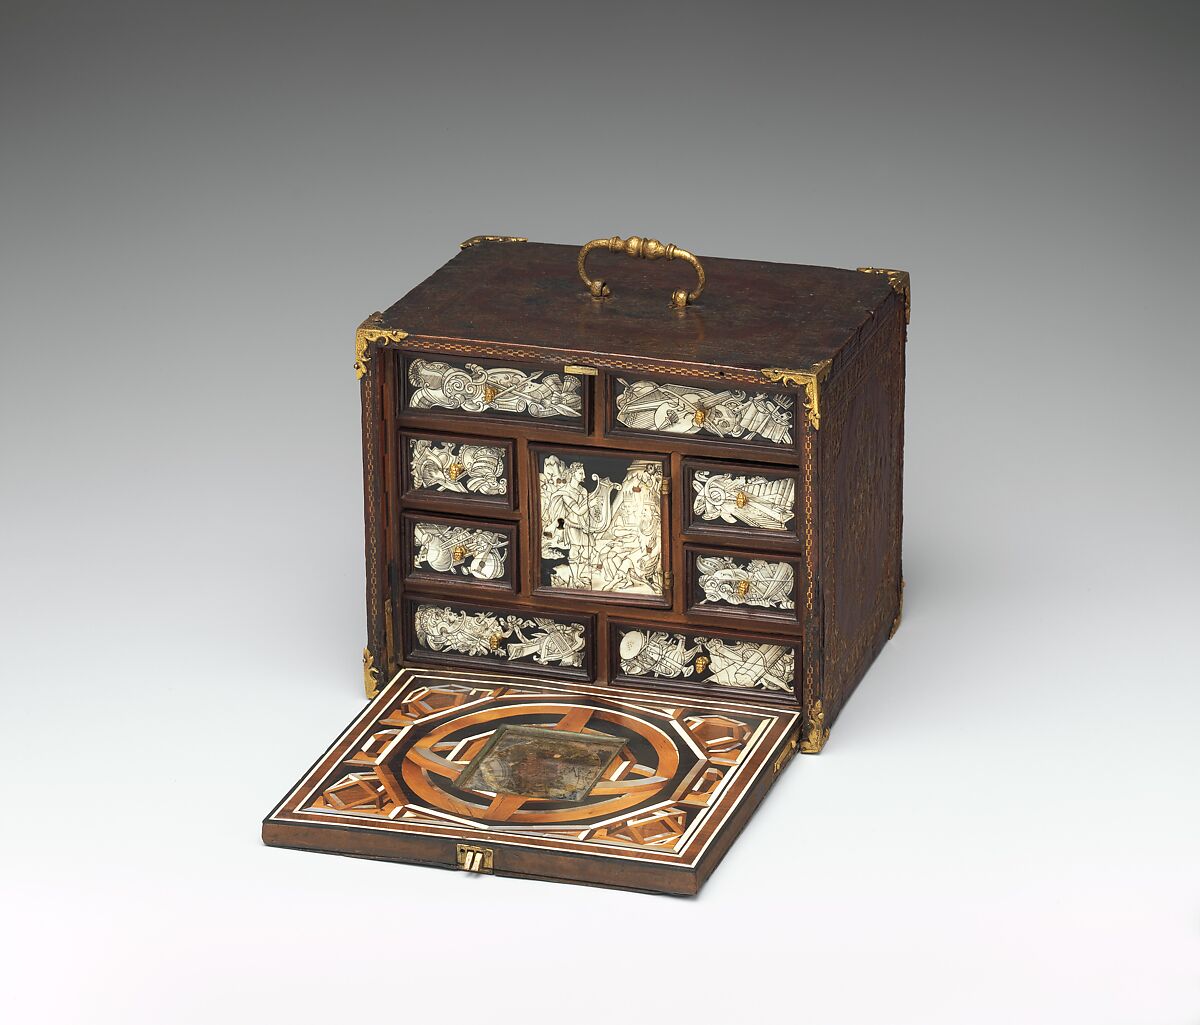 Miniature collector's cabinet, Ivory drawer decoration after a composition by Bernard Salomon (French, ca. 1508–ca. 1561), Dyed and gold-tooled leather on secondary woods pine, poplar, pear, yew; veneers of ivory, mother-of-pearl, pear, plum, ebony, rosewood, holly, ash, green stained poplar; gilded metal; reverse-painted glass, German, possibly Nuremberg 